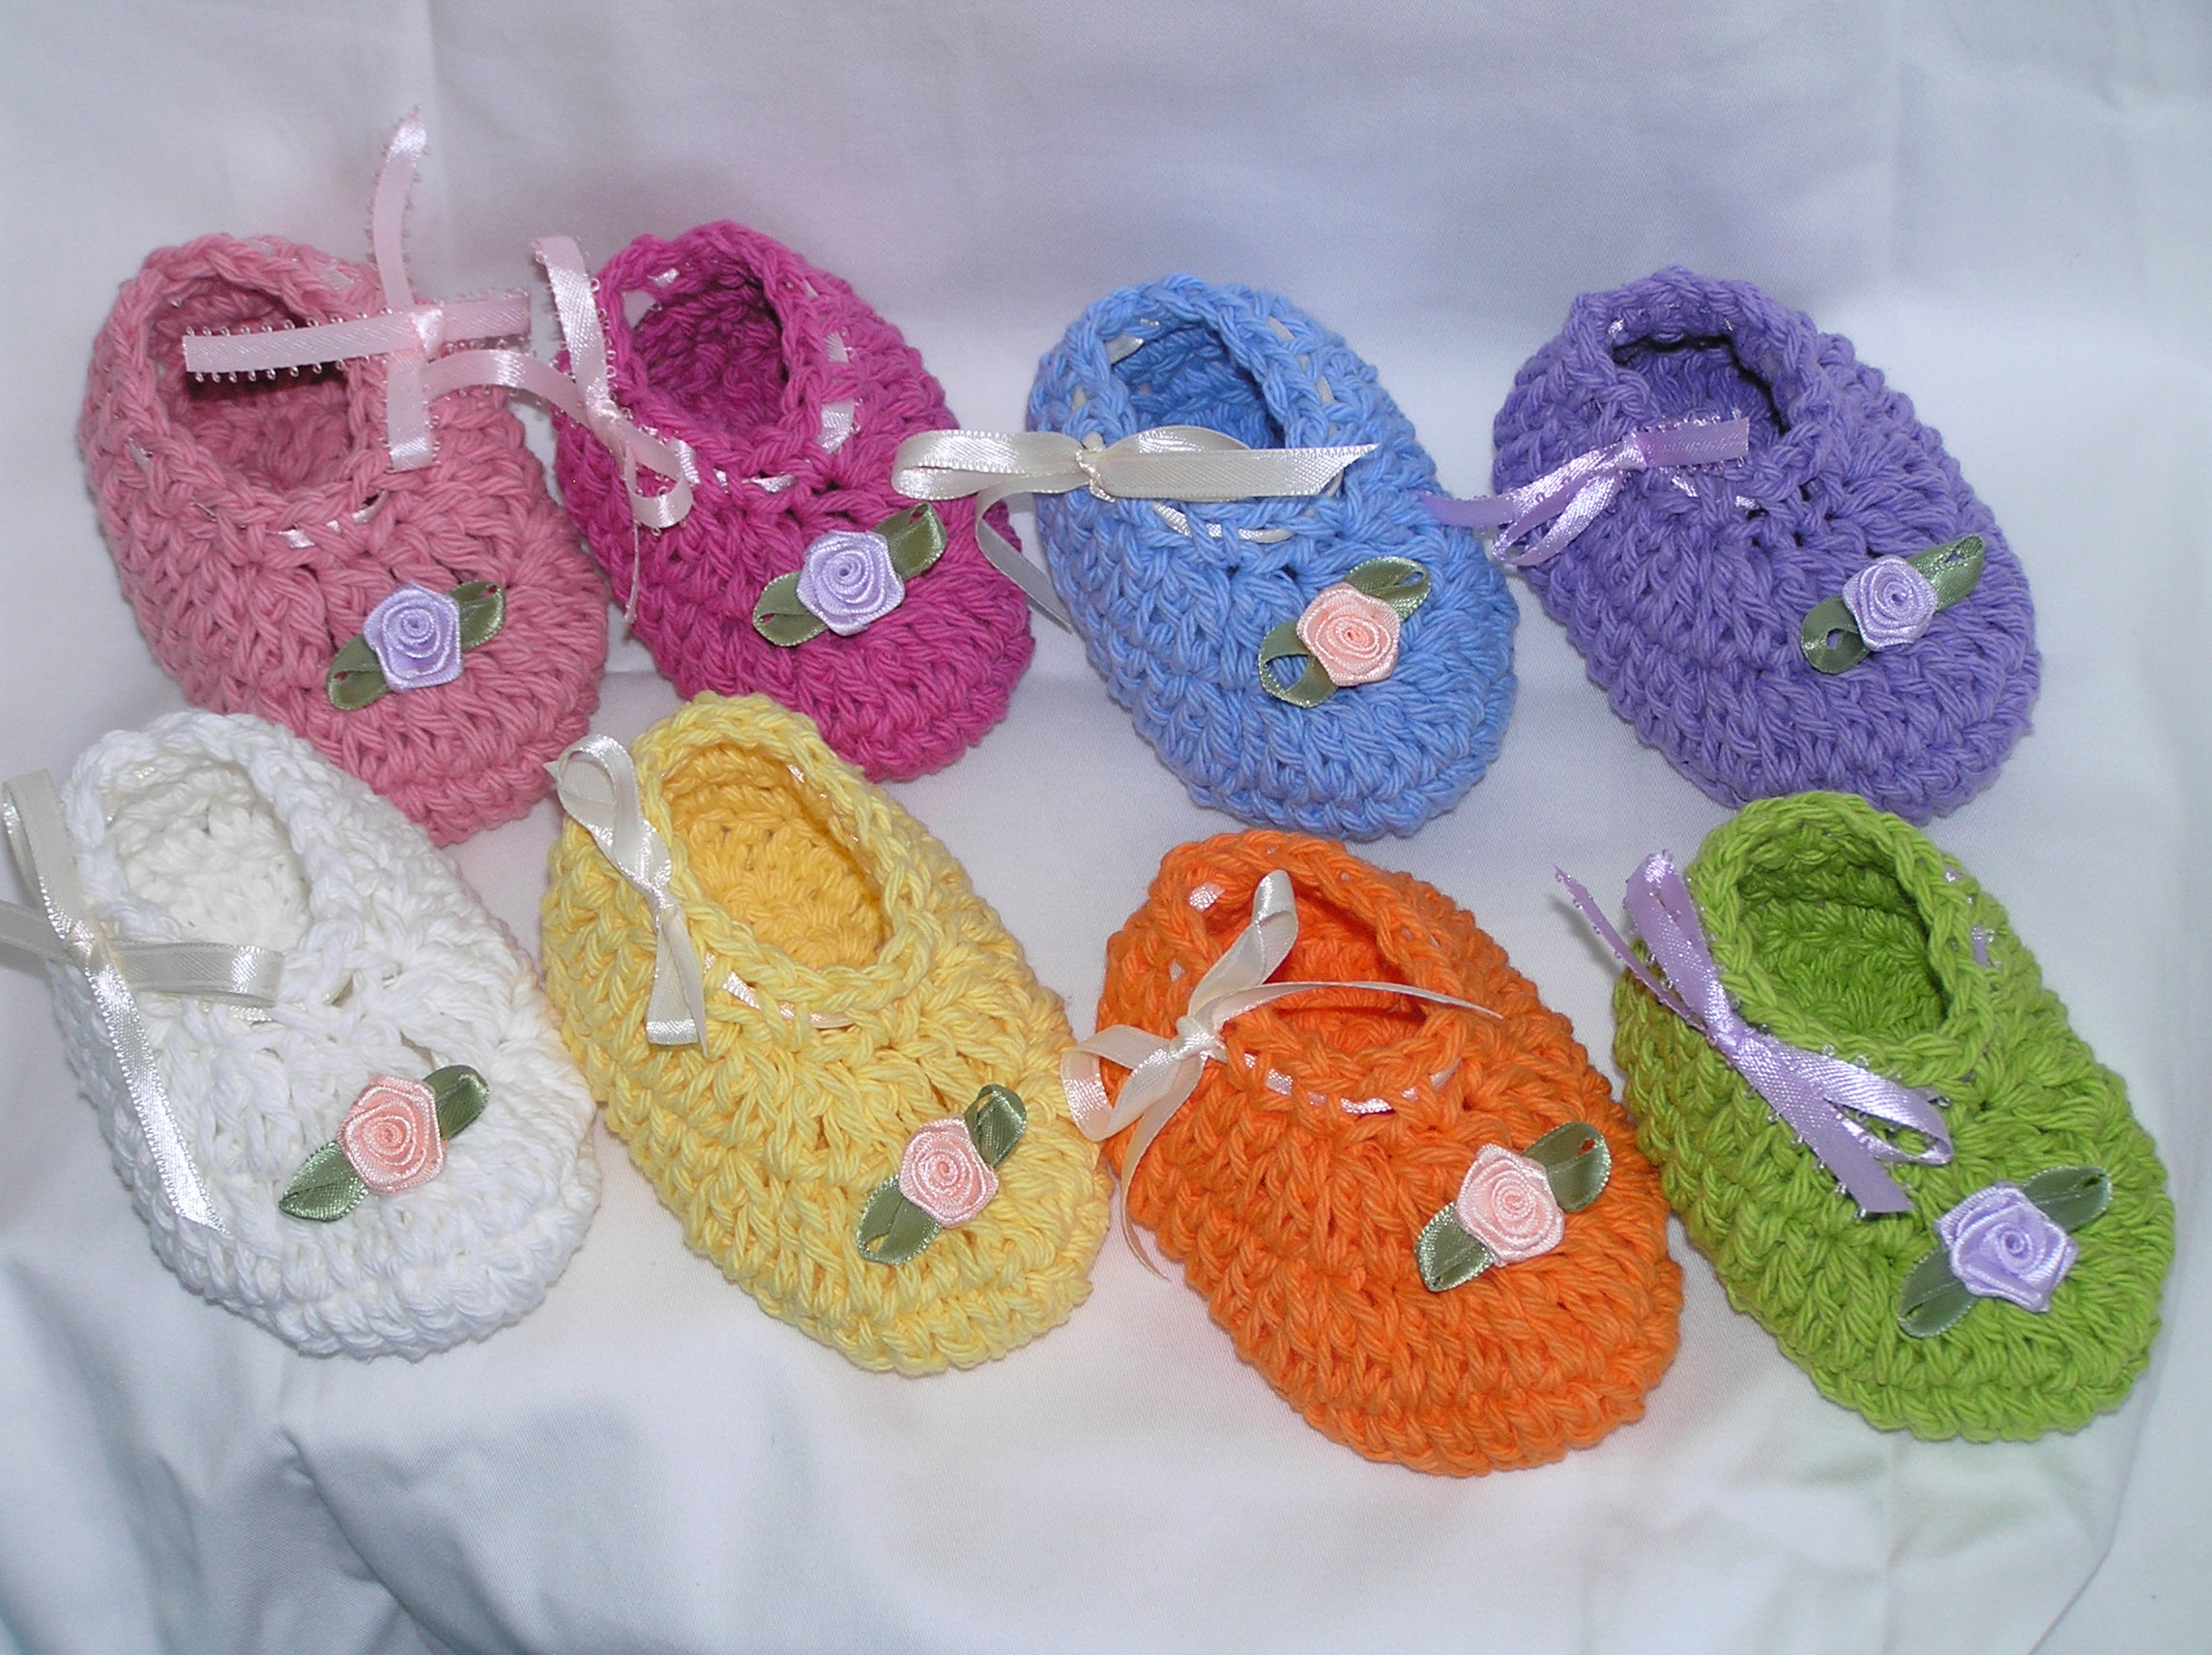 Crochet Patterns Only: Easy Crocheted Newborn Baby Hat &amp; Booties